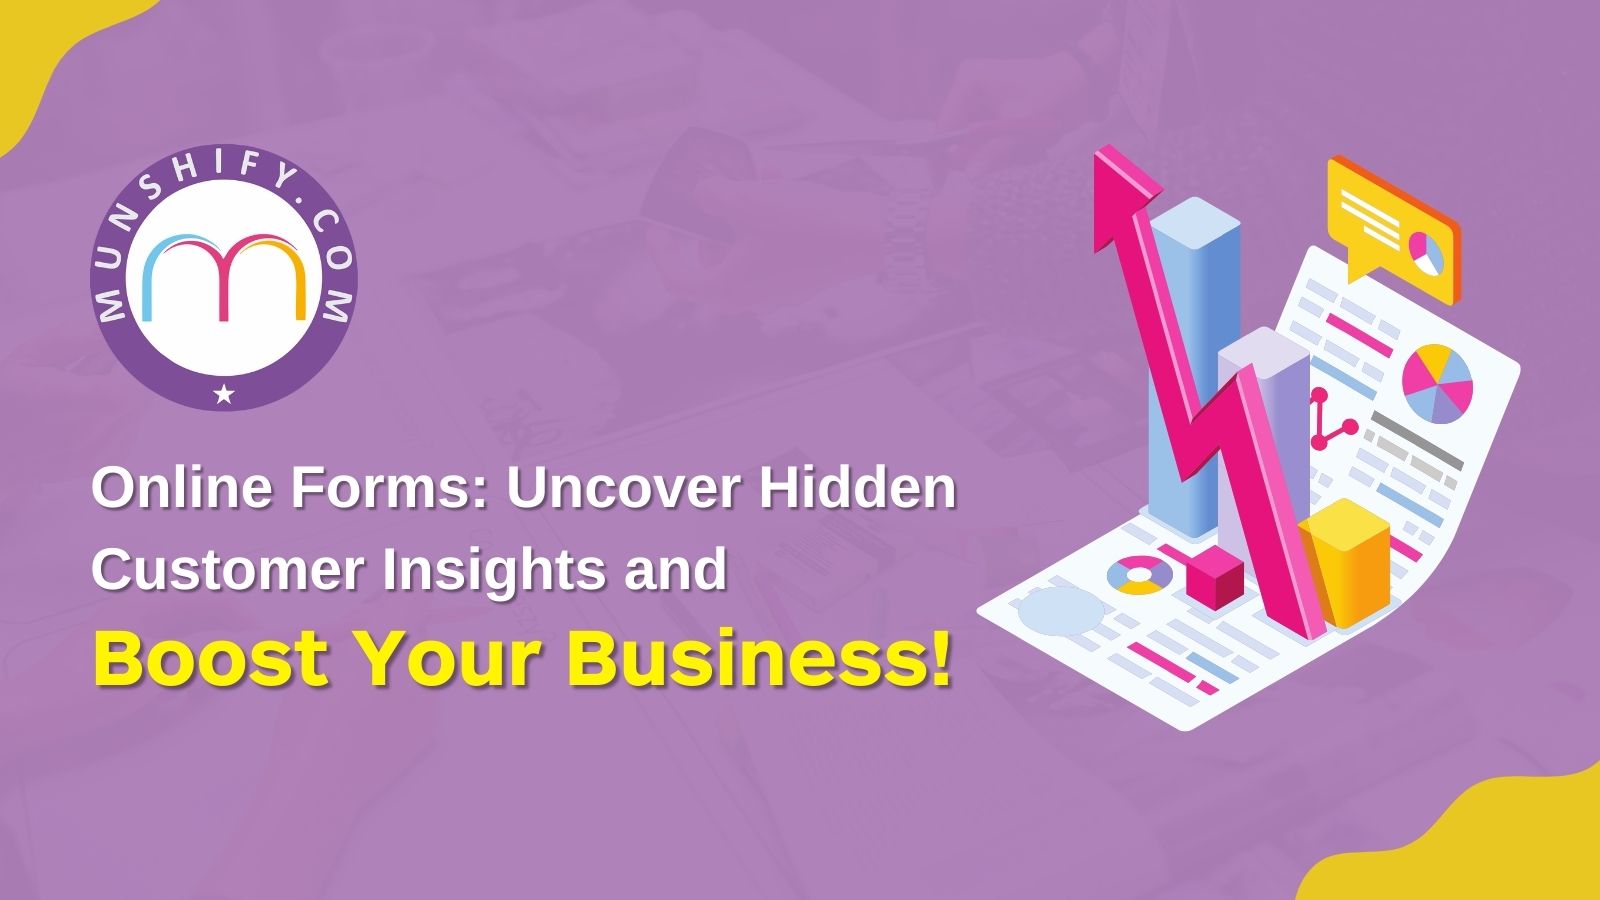 Online Forms: Uncover Hidden Customer Insights and Boost Your Business! 